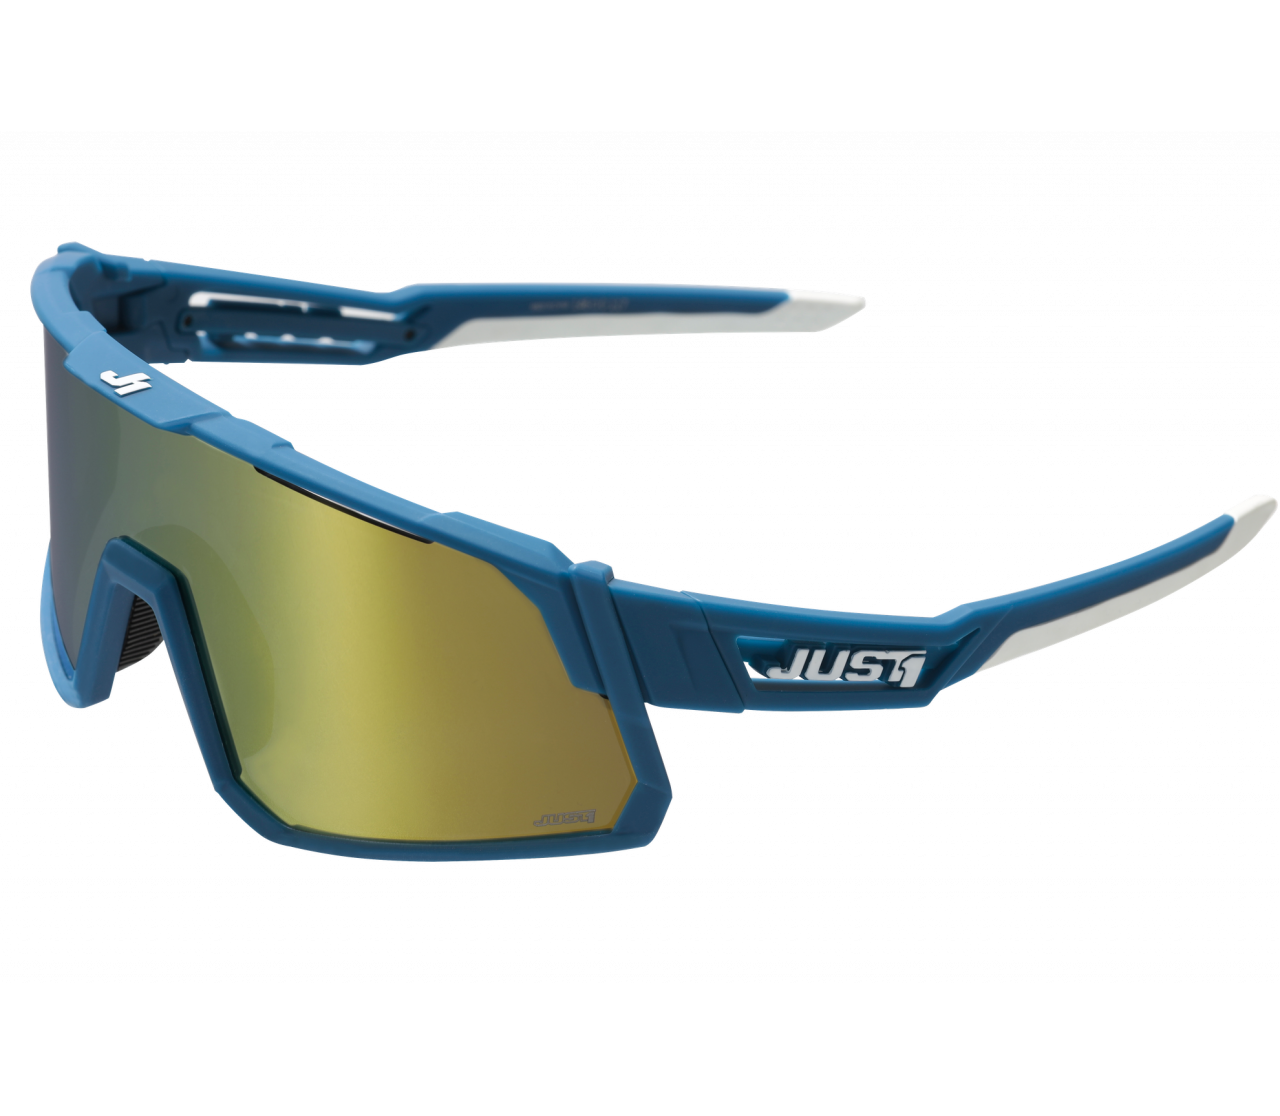 JUST1 SNIPER BLUE/WHITE with gold mirror lens